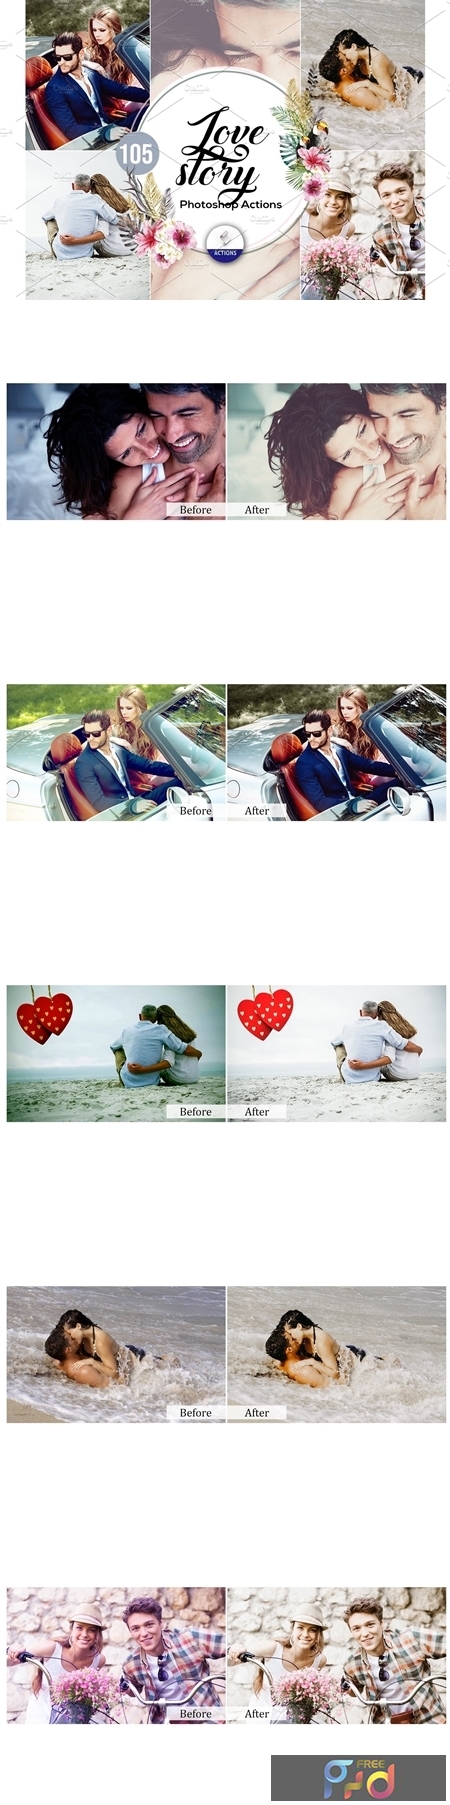 105 Love Story Photoshop Actions 3937845 1